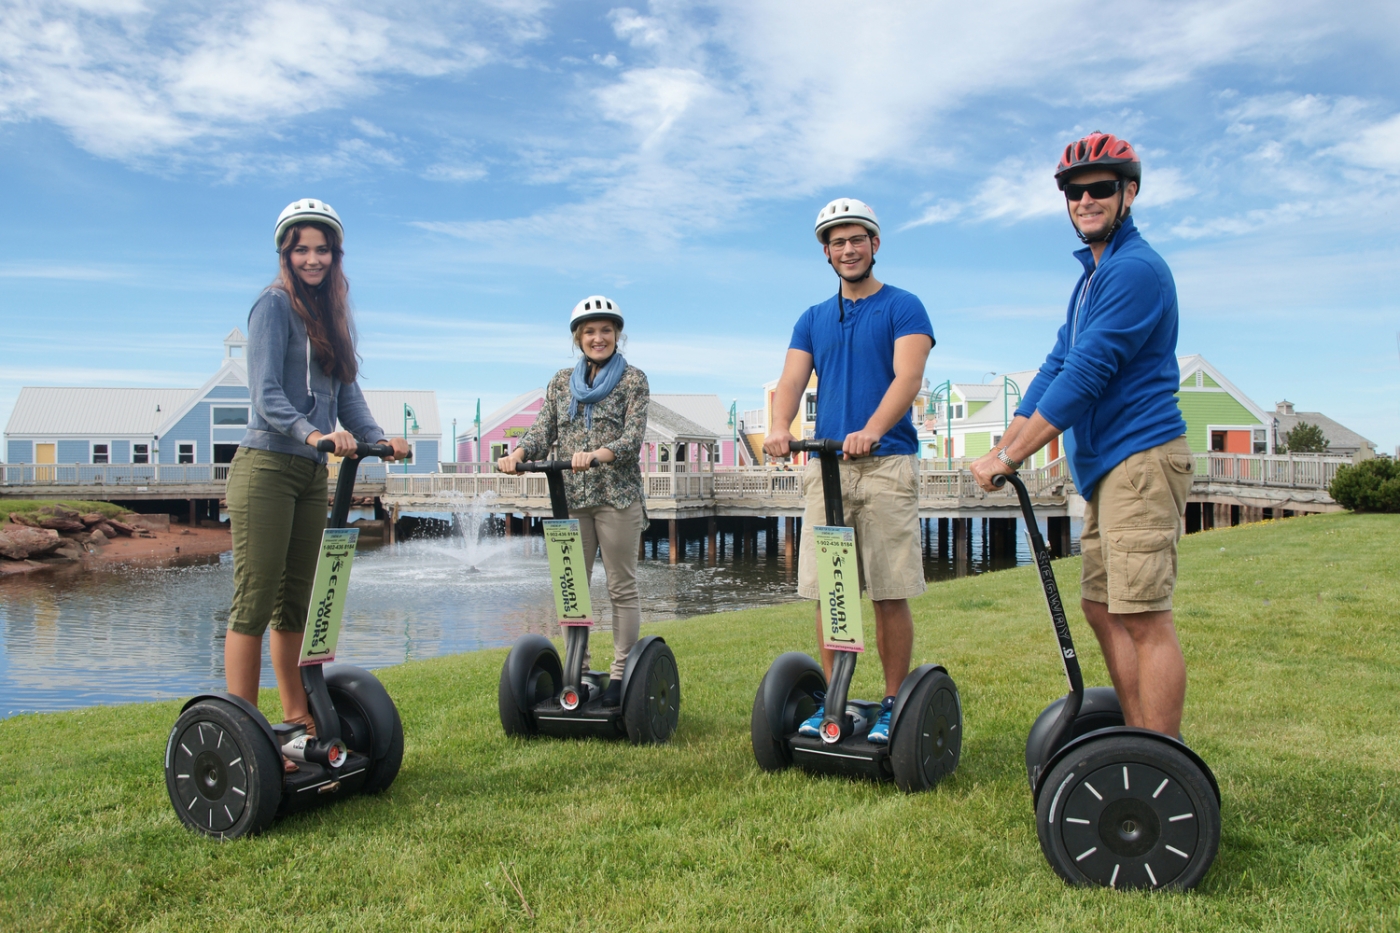 Four adults wearing helmets riding out for a ride on Segways